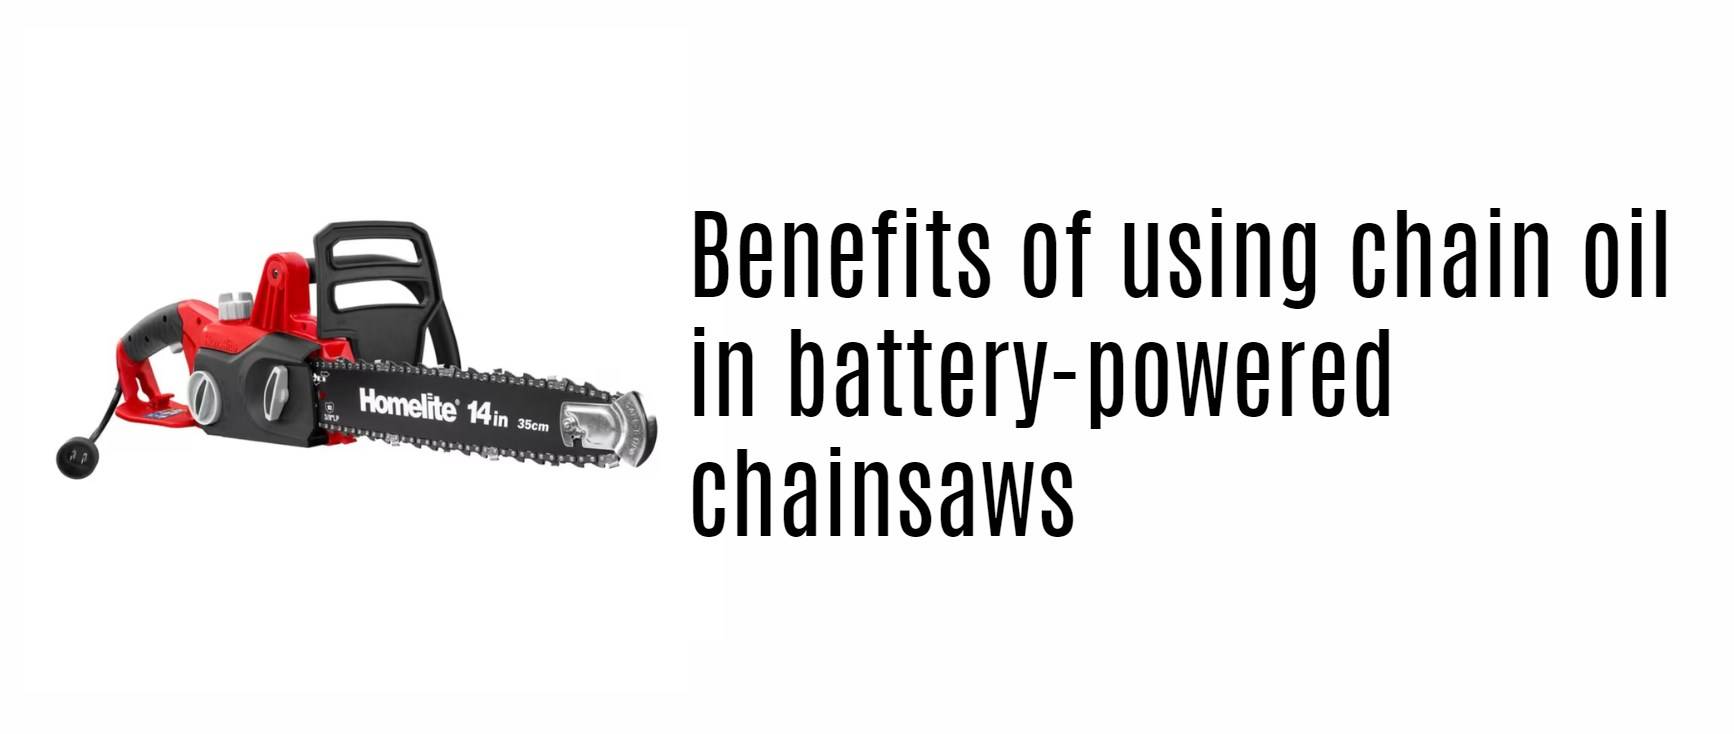 Benefits of using chain oil in battery-powered chainsaws